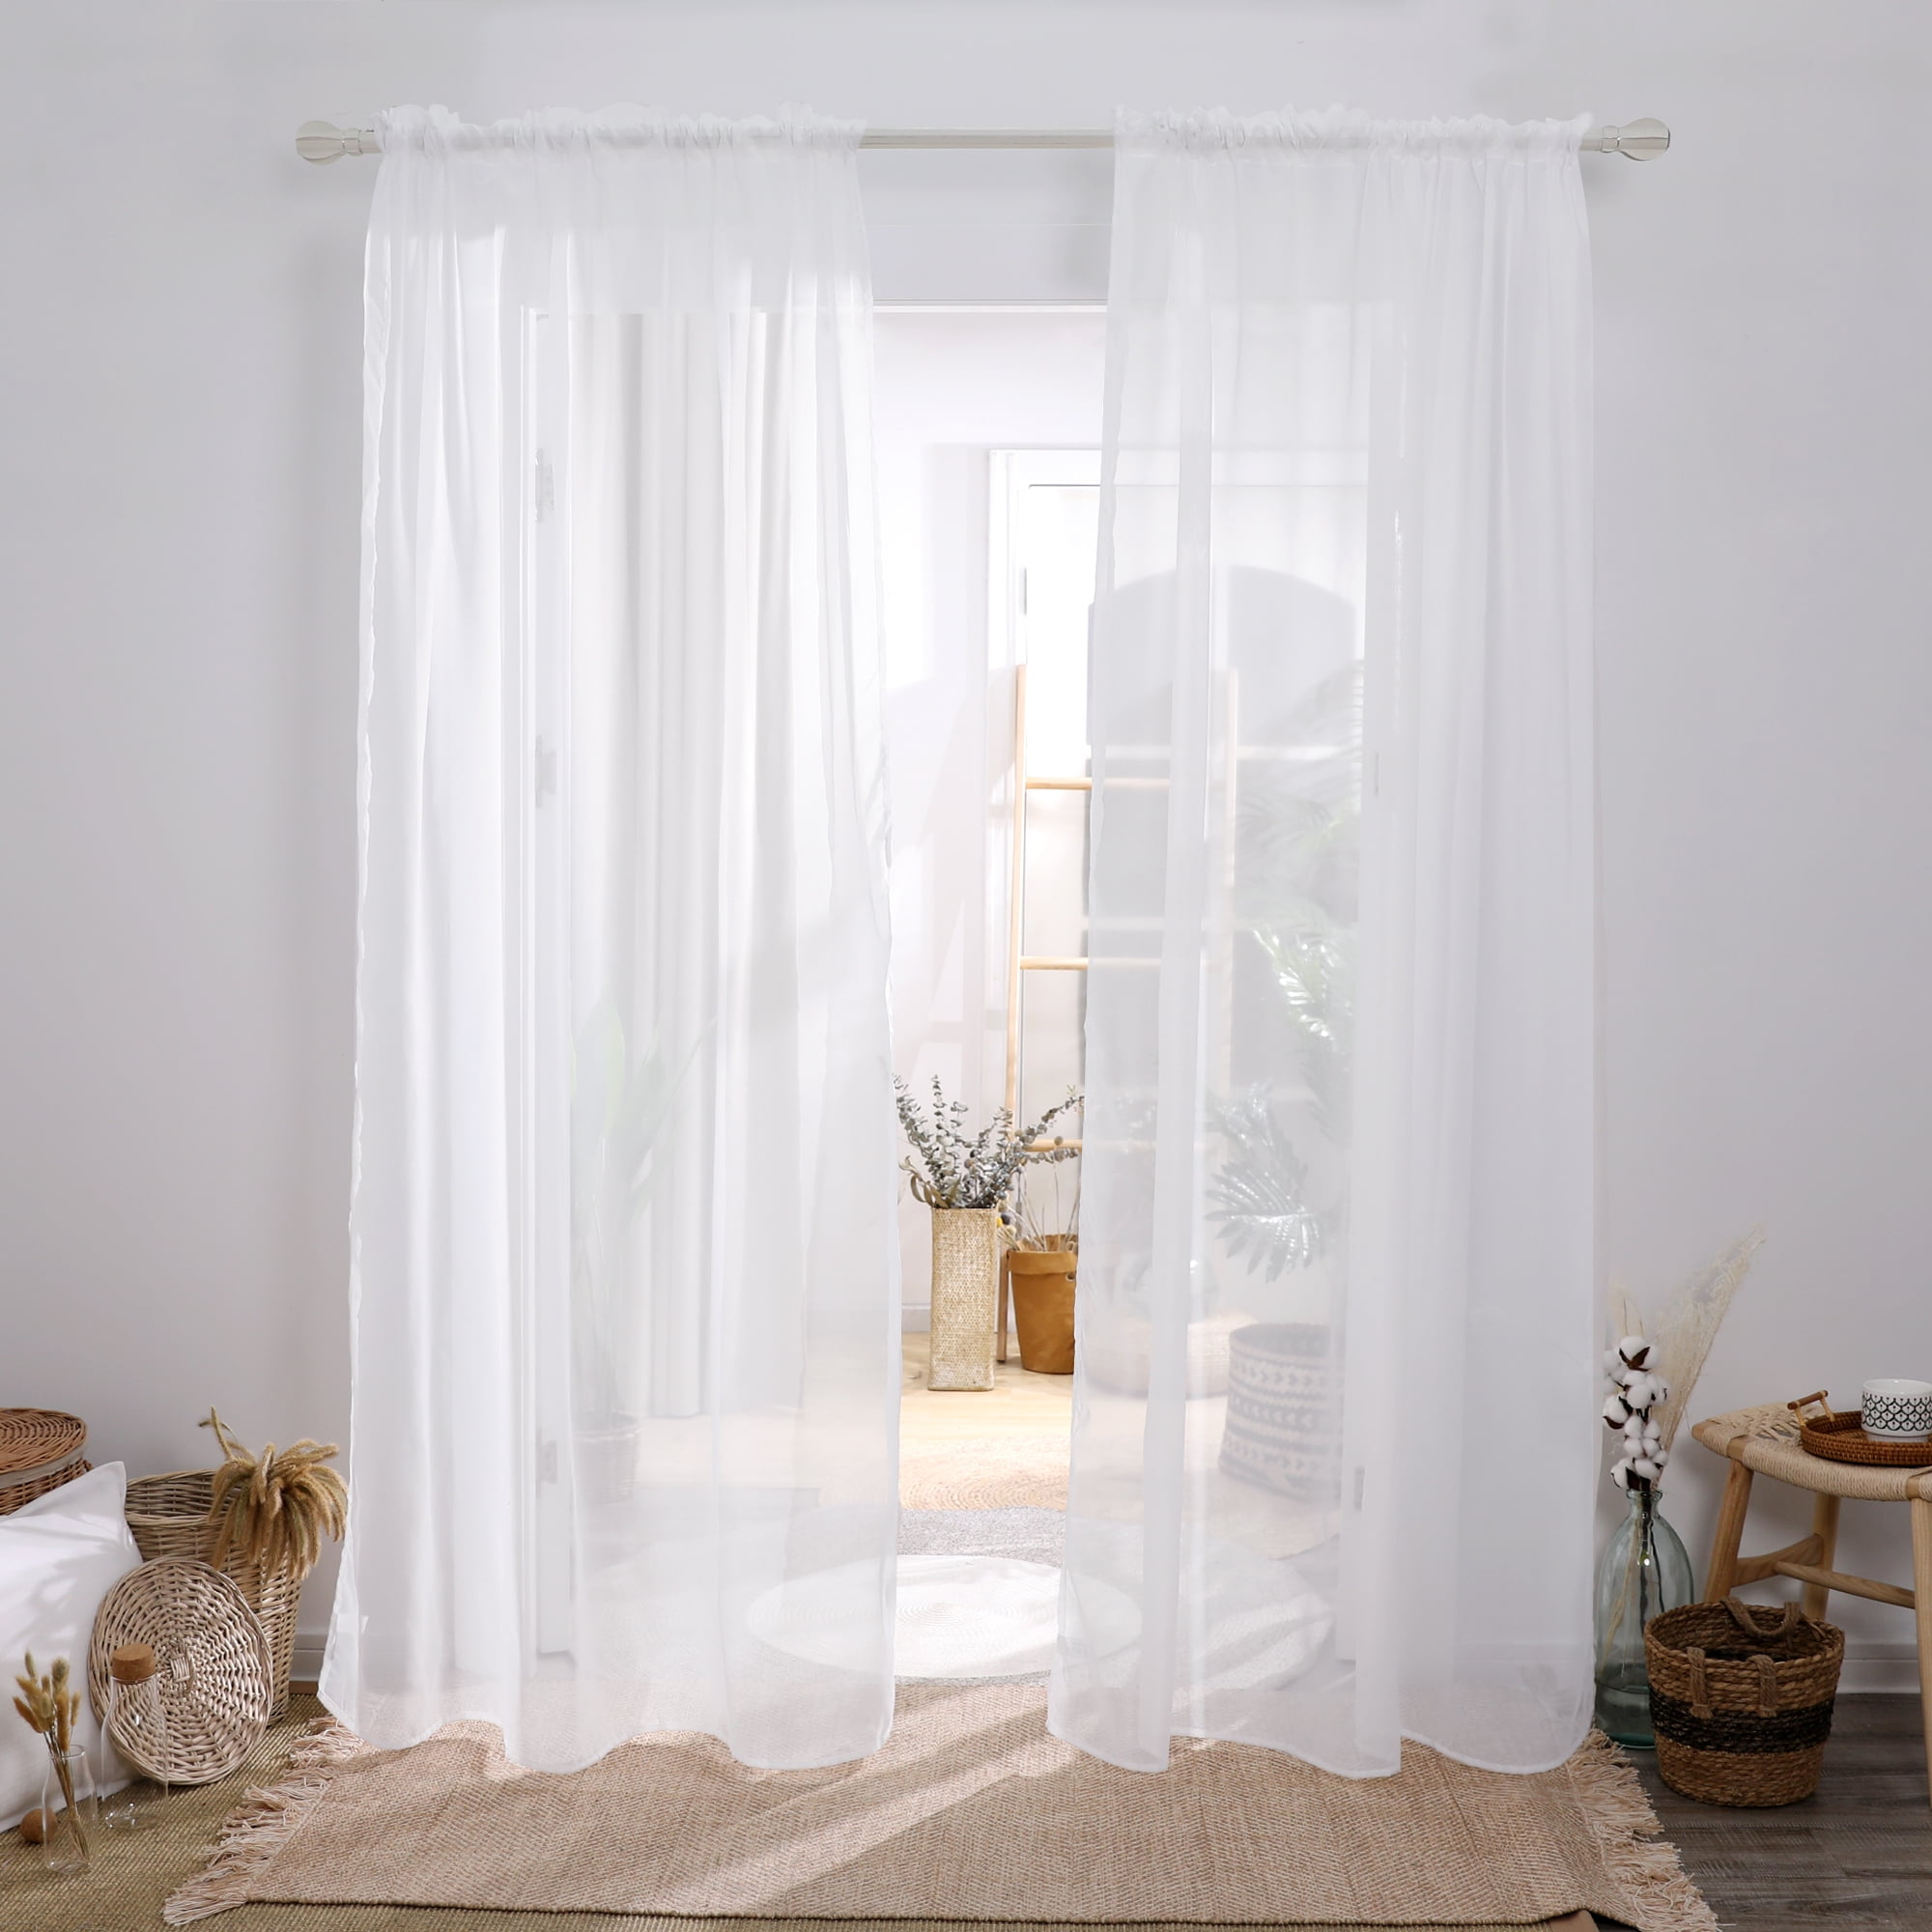 Deconovo Home Decoration Net Curtains Pencil Pleat Solid Voile Curtains Super Soft Sheer Curtains Semi Transparnet Net Voile Curtains for Bedroom White 52 x 84 Inch 2 Panels